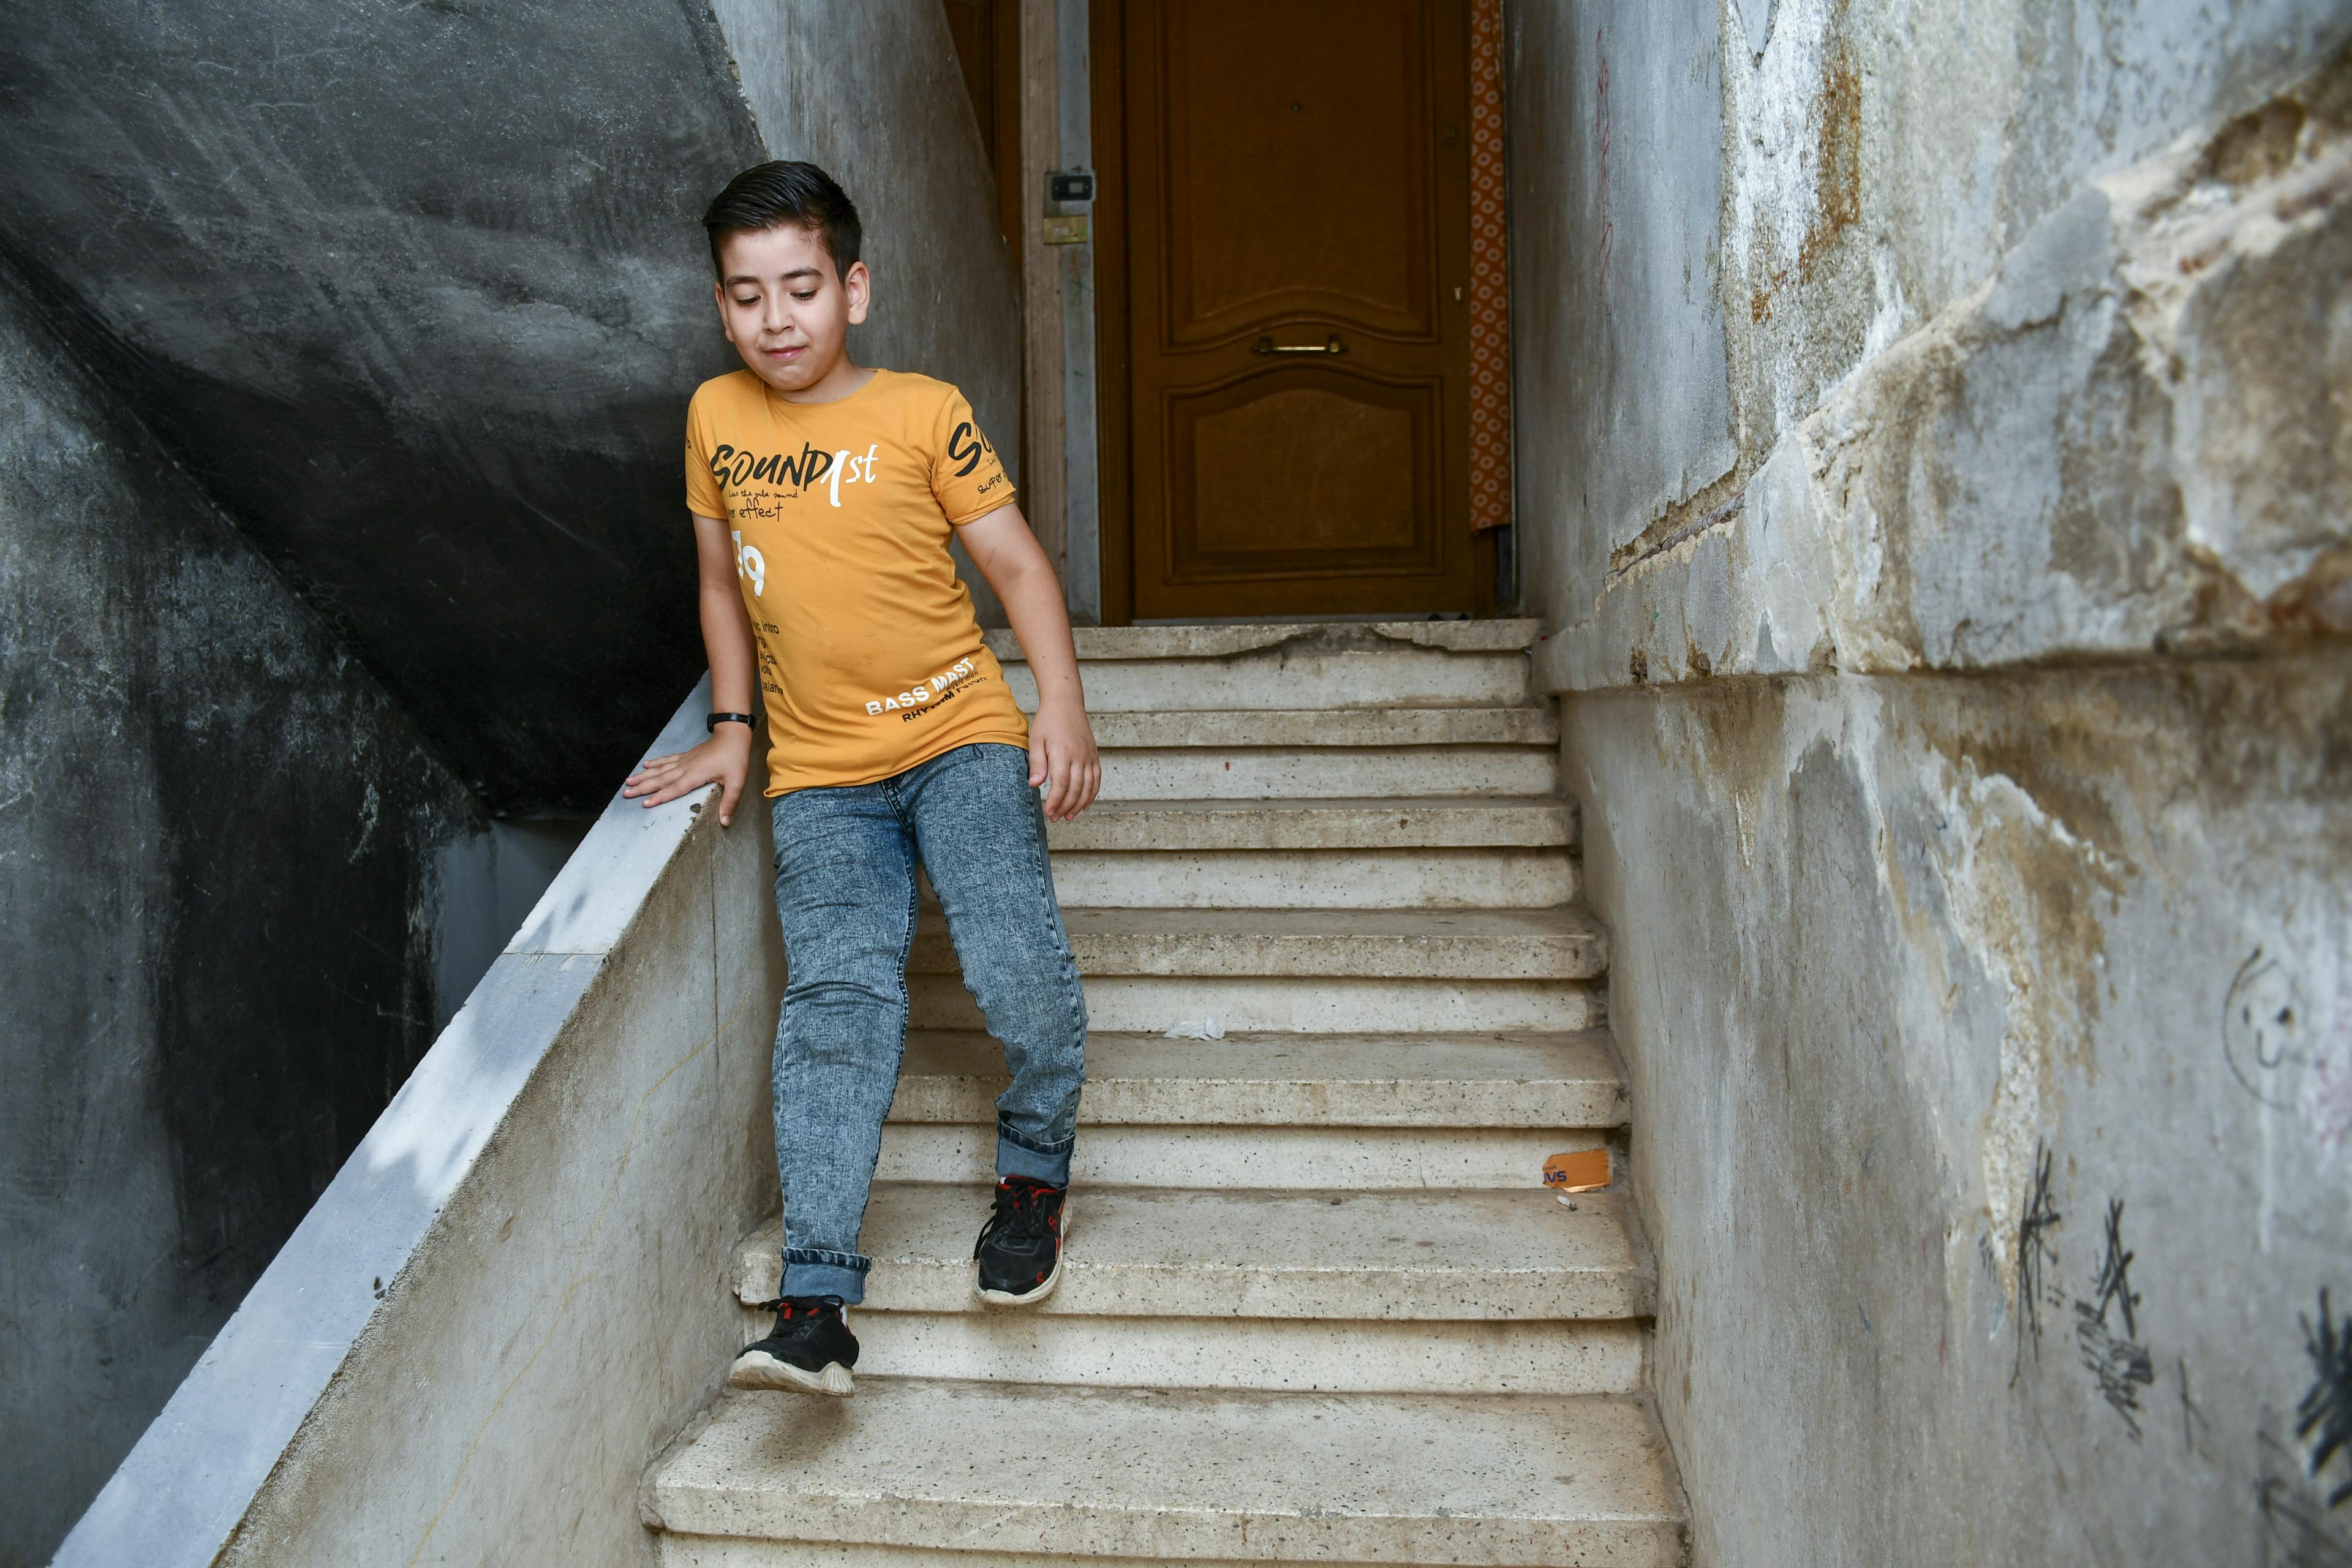 No longer in a wheelchair, Laith can now walk up and down the stairs of his home without assistance, thanks to receiving a prosthetic leg with the help of a UNICEF-supported programme.